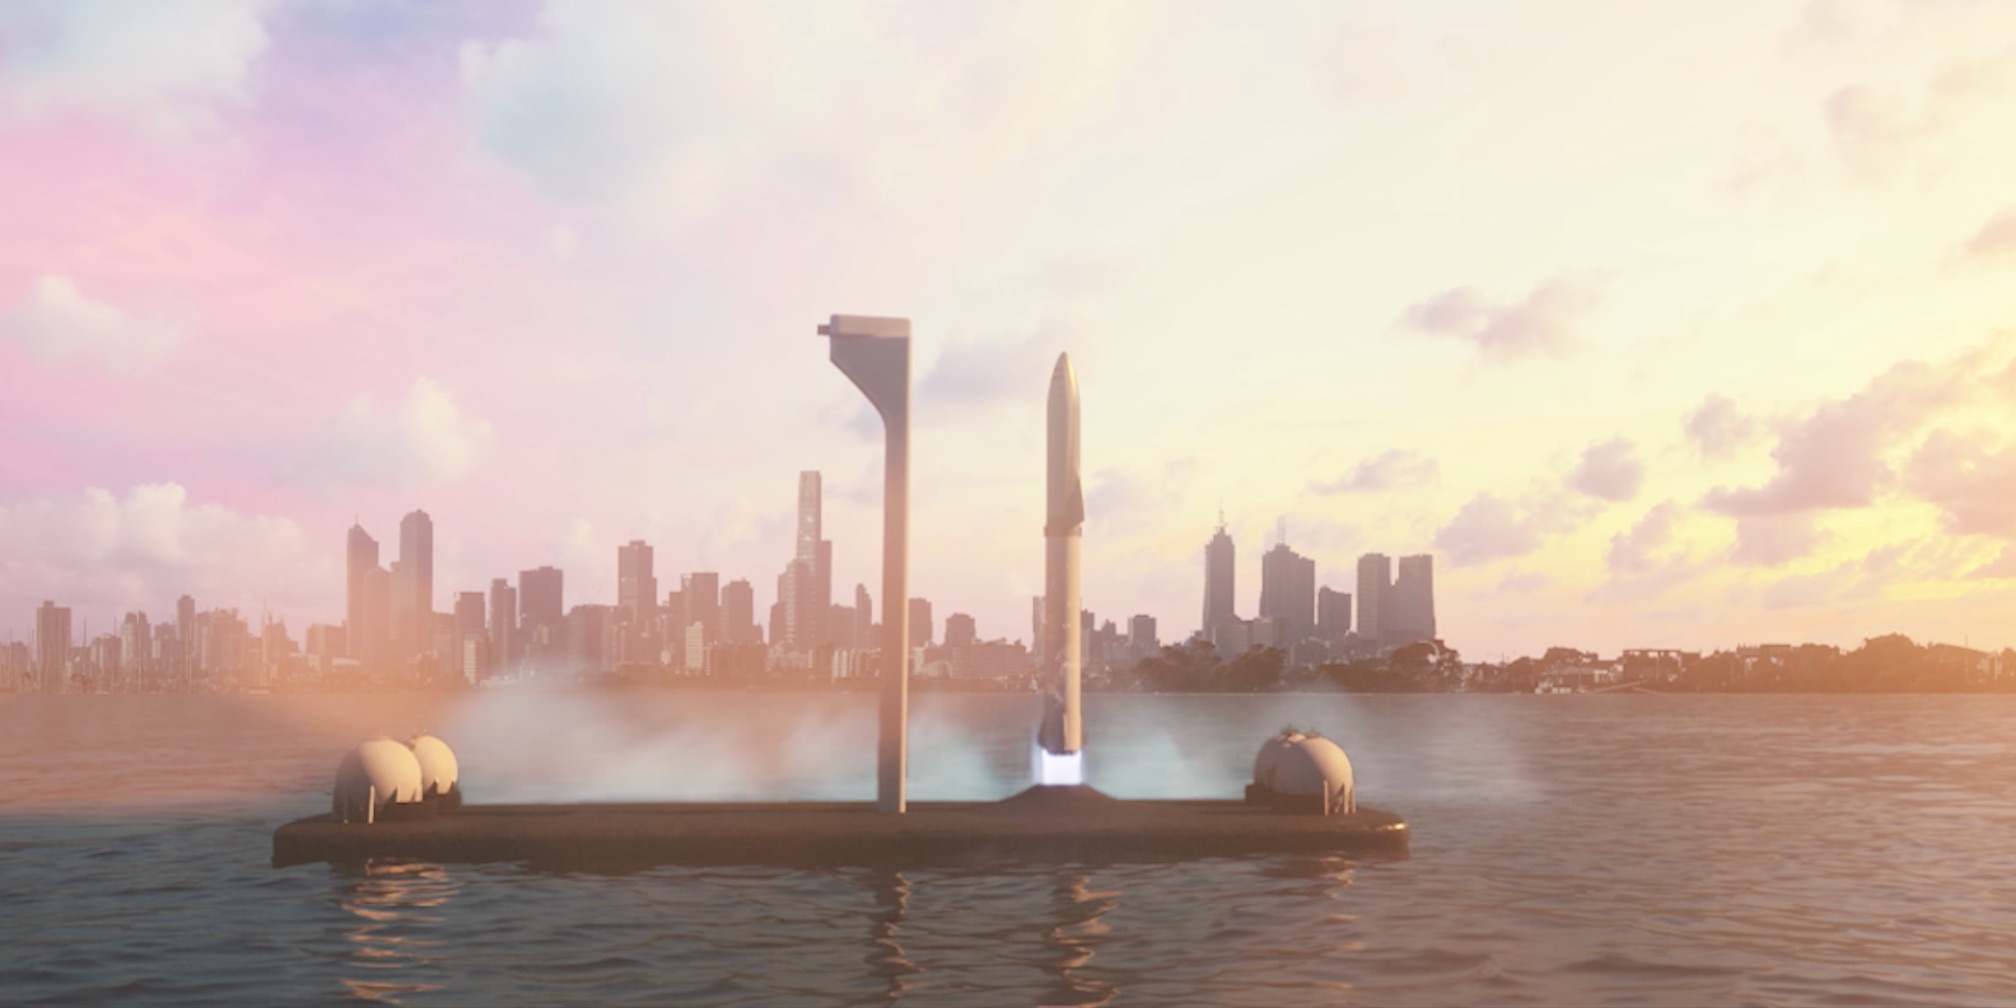 spacex-bfr-earth-transport